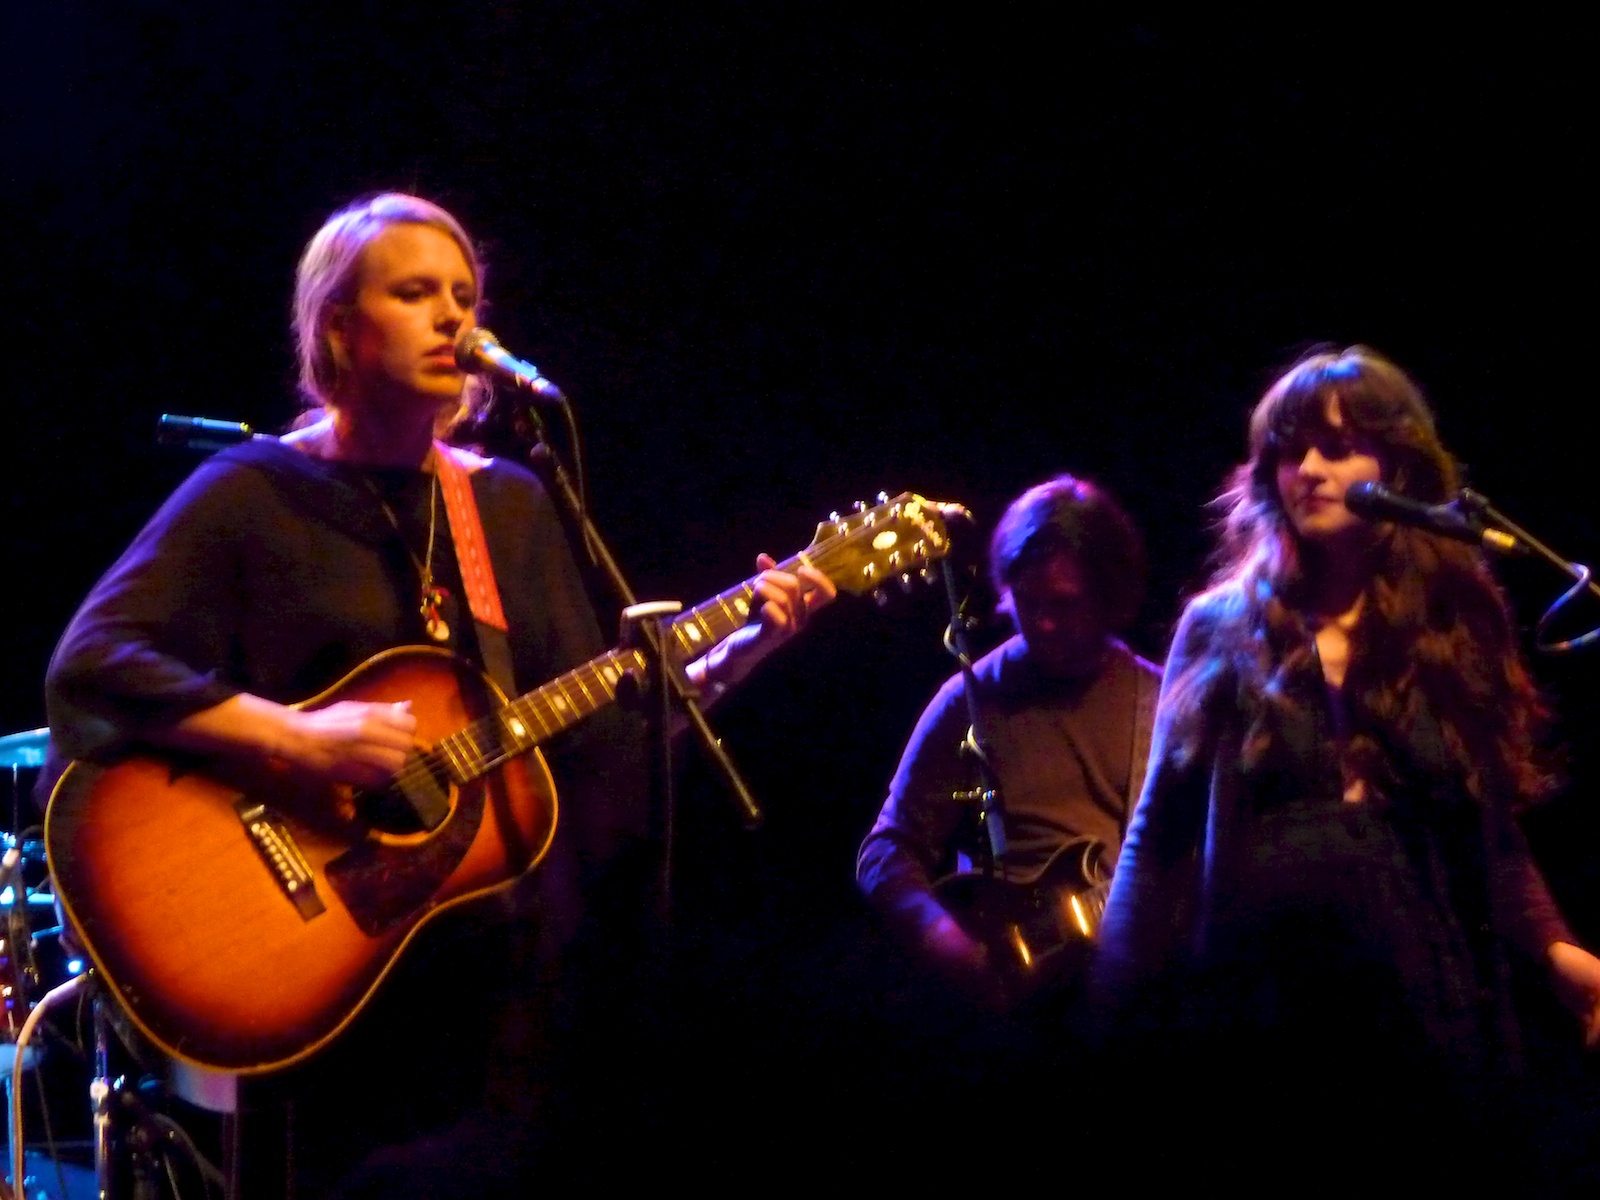 a man and woman on stage with guitars